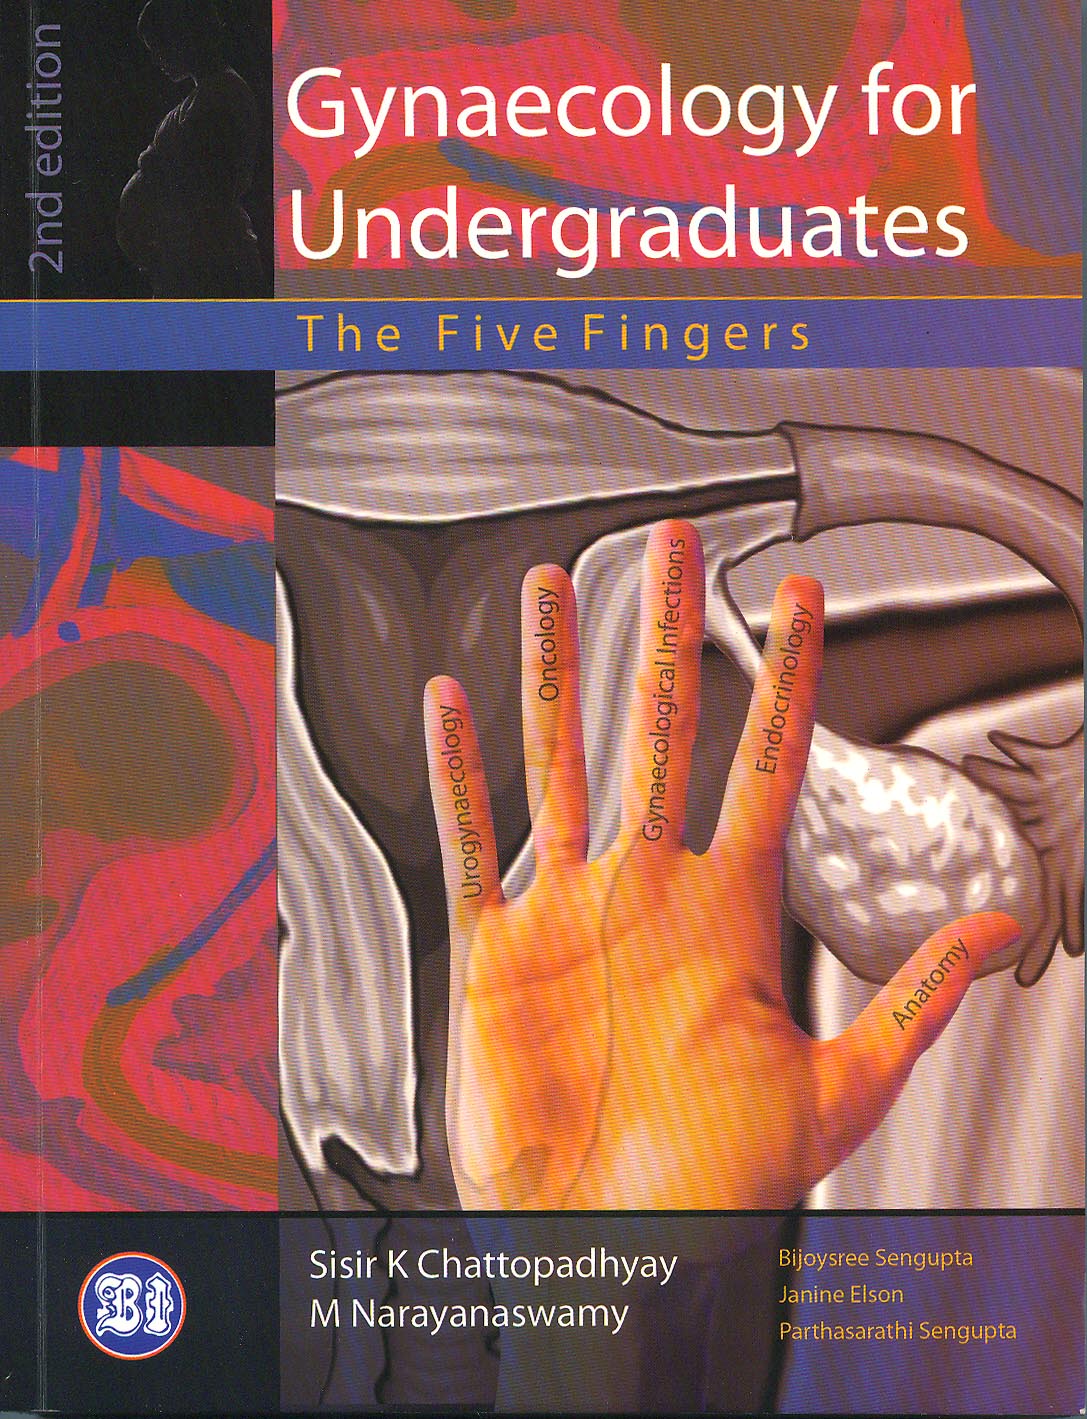 Gynaecology for Undergraduates: The Five Fingers